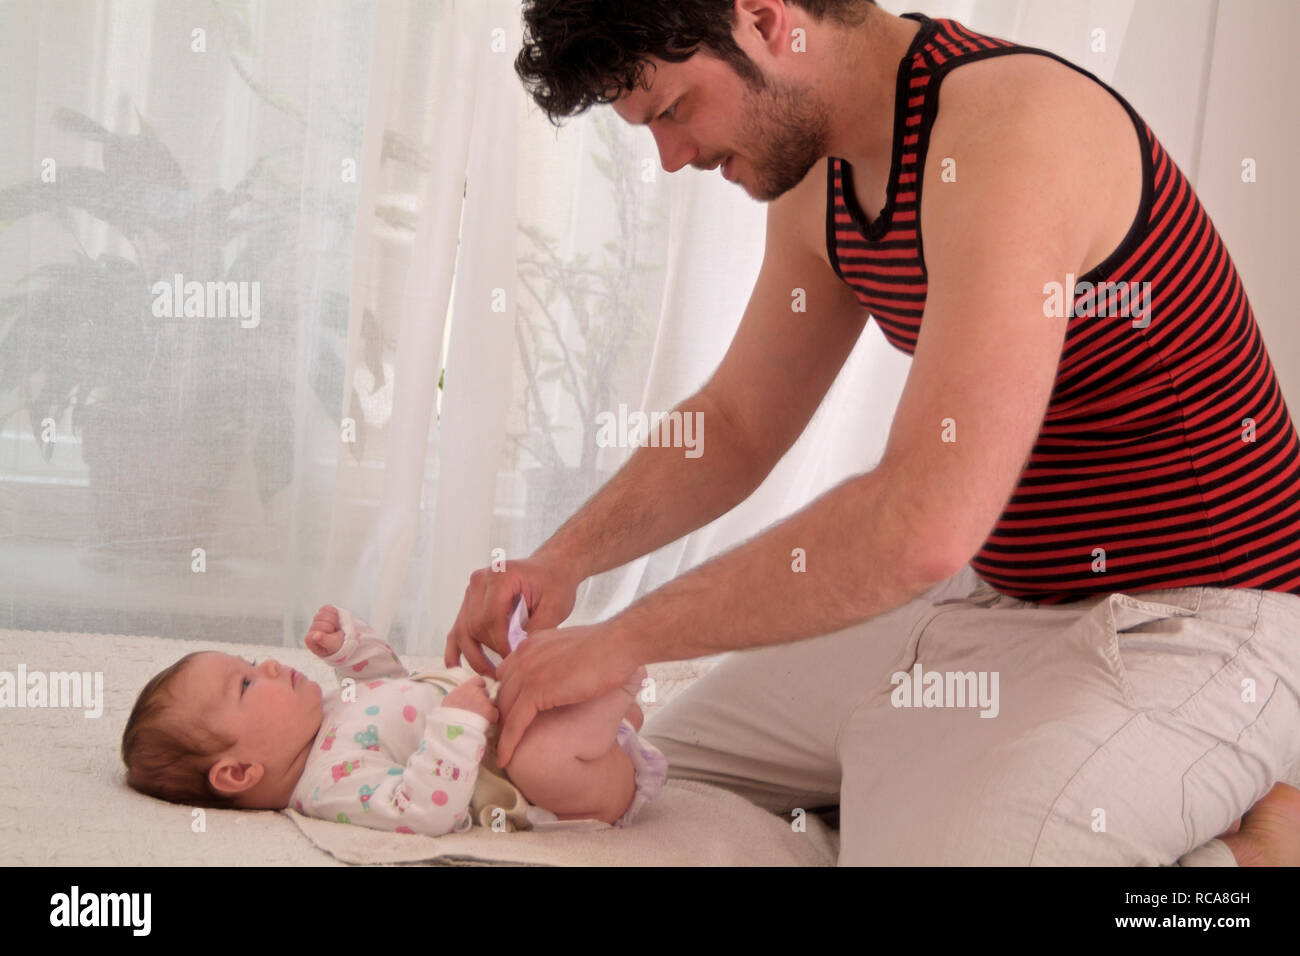 Vater kümmert sich um Säugling | father with baby taking care Stock Photo